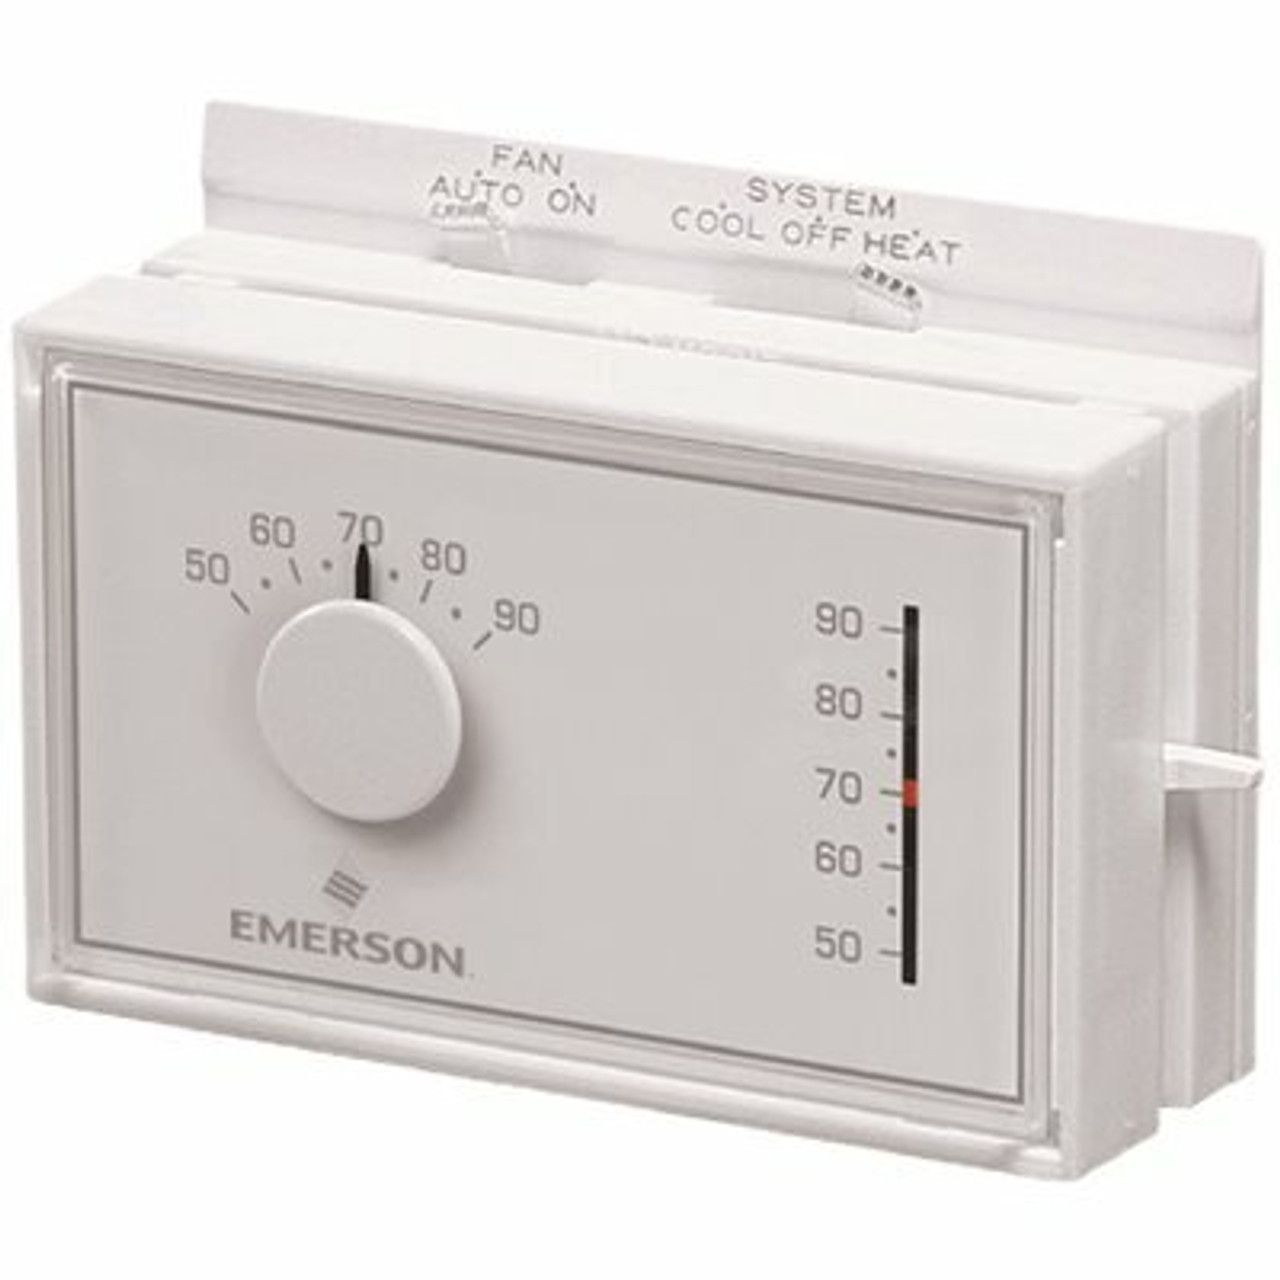 213011, Emerson Mercury-Free Mechanical Thermostat For Heat Pump Systems - 661974